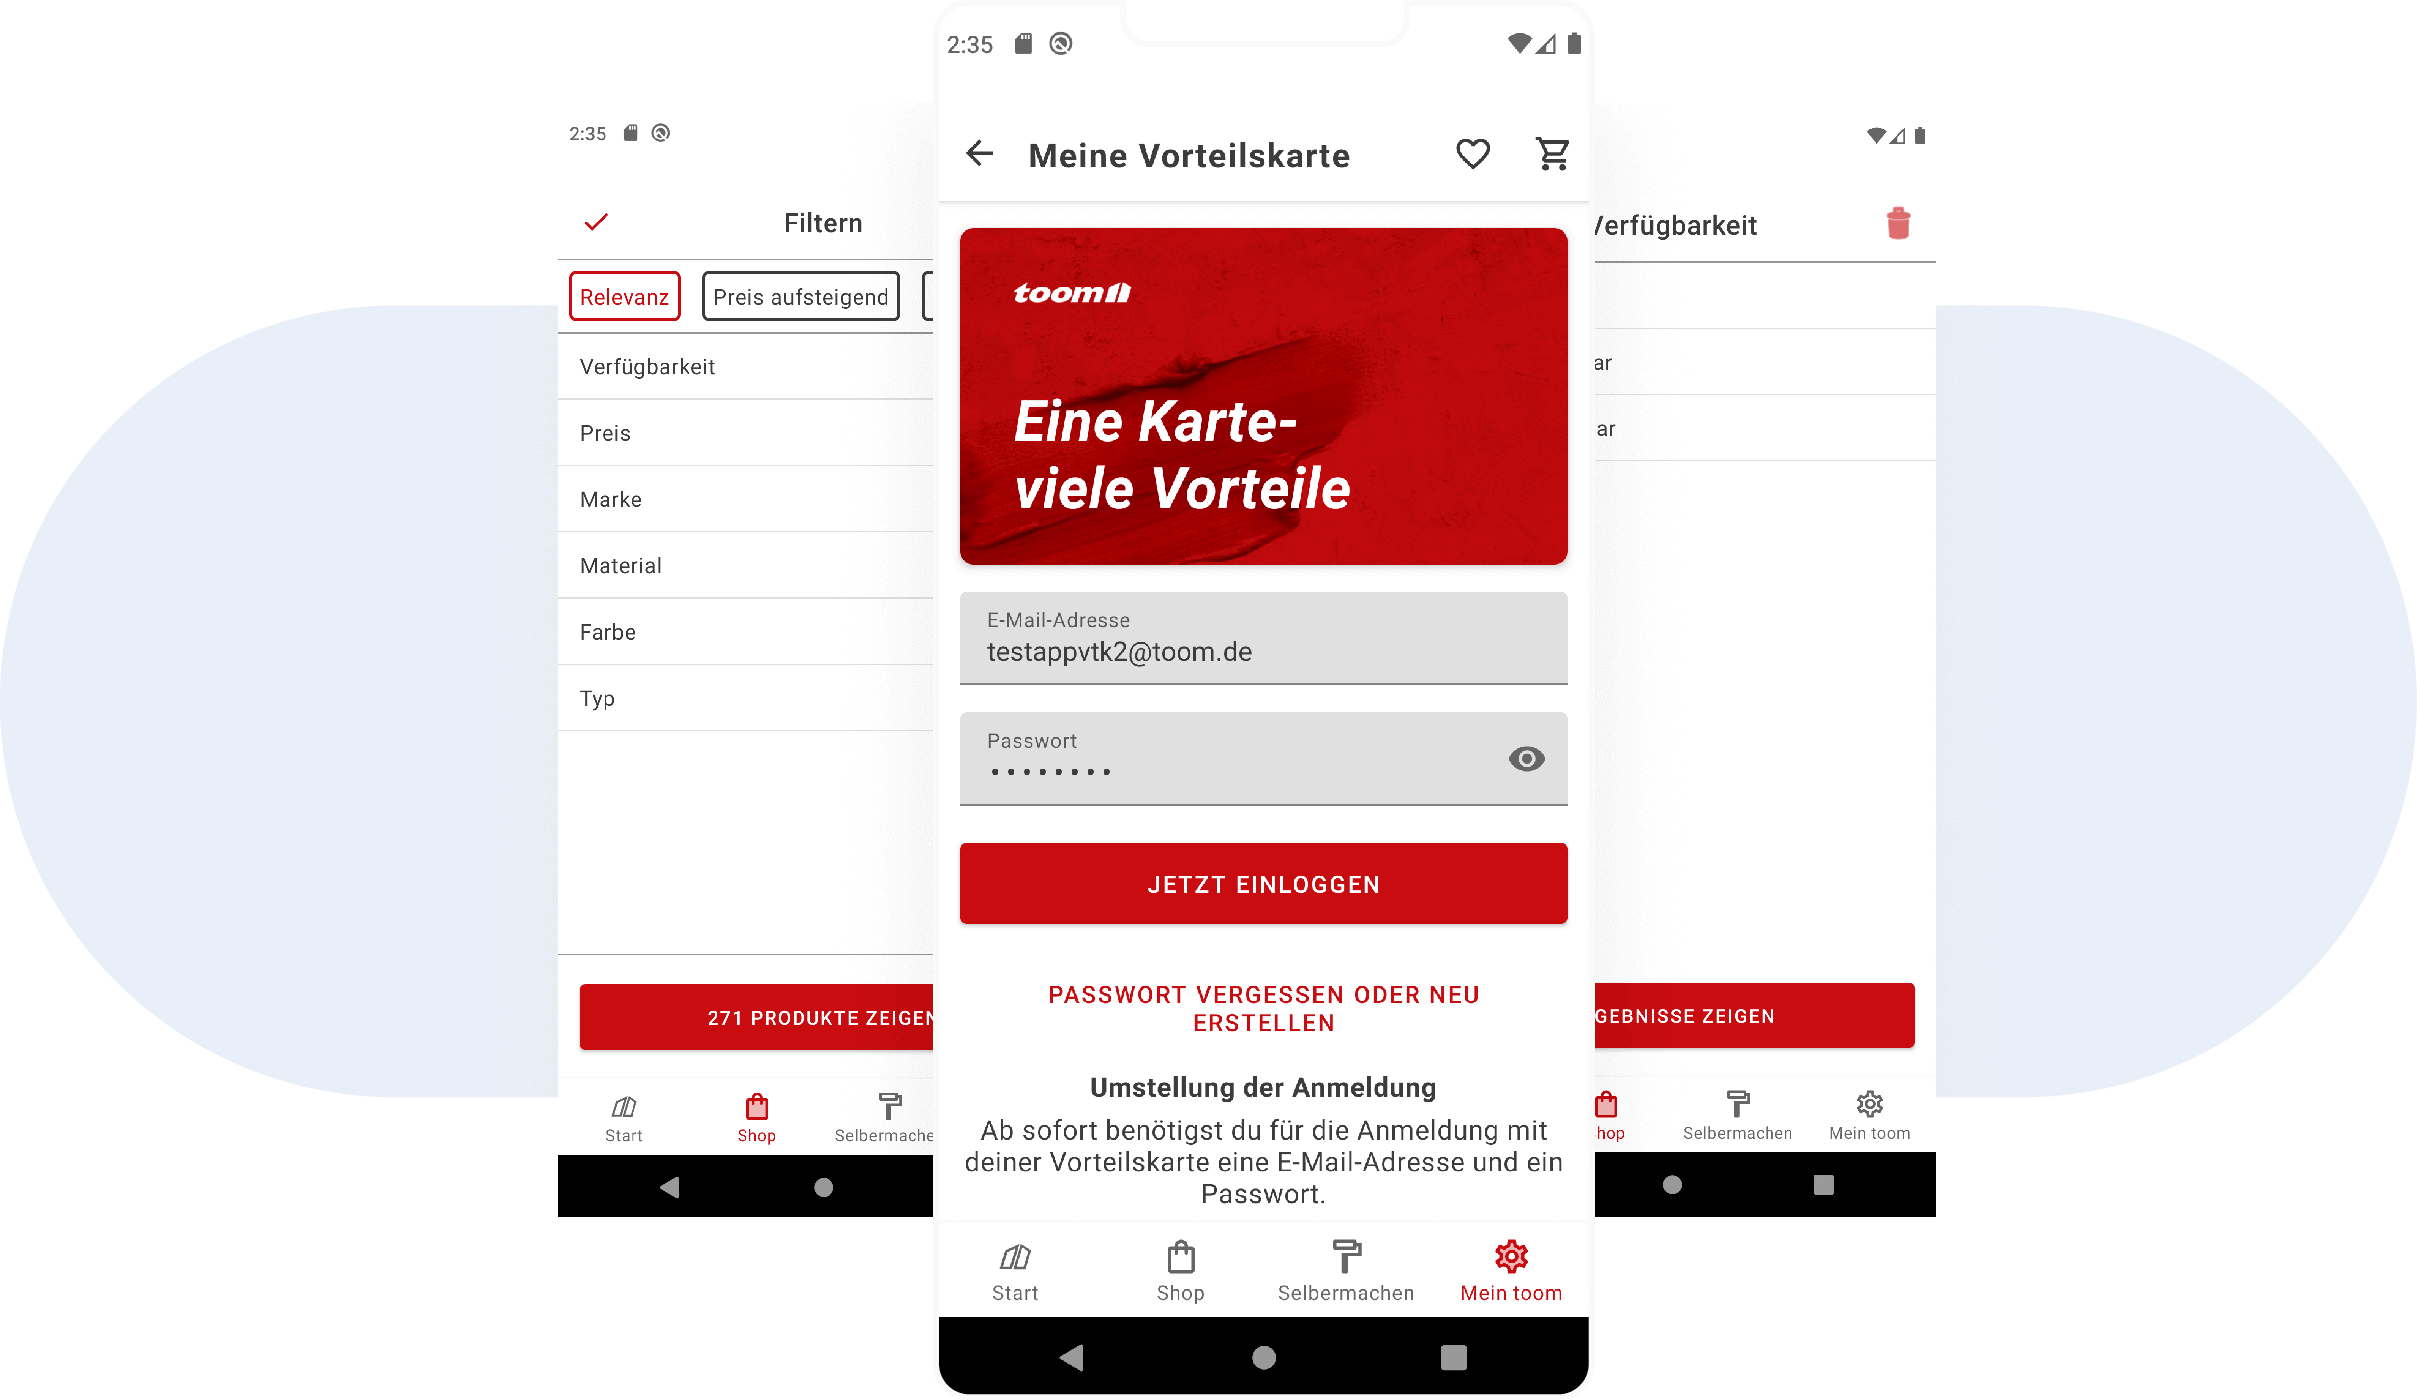 Registration interface displayed on the phone